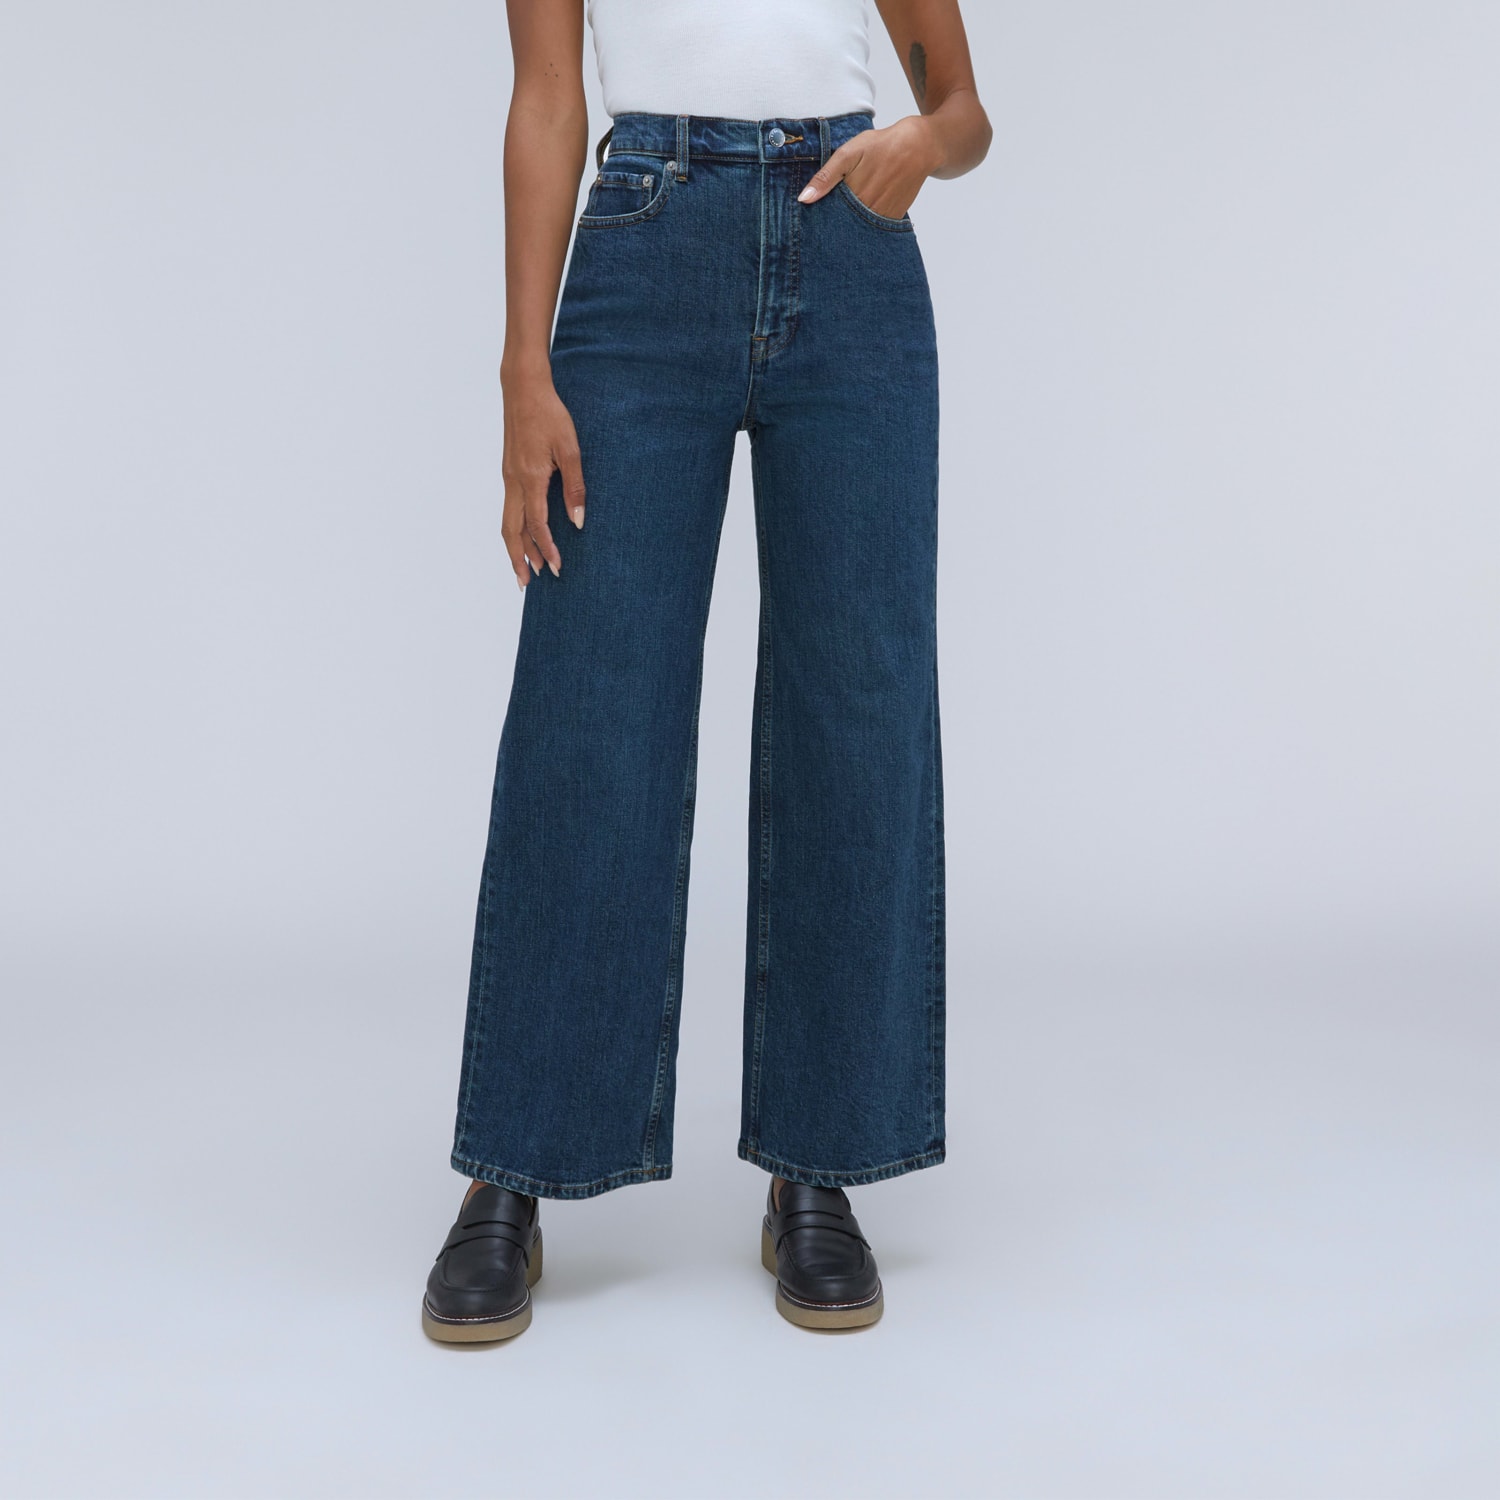 9 flare jeans to add to your wardrobe - TODAY